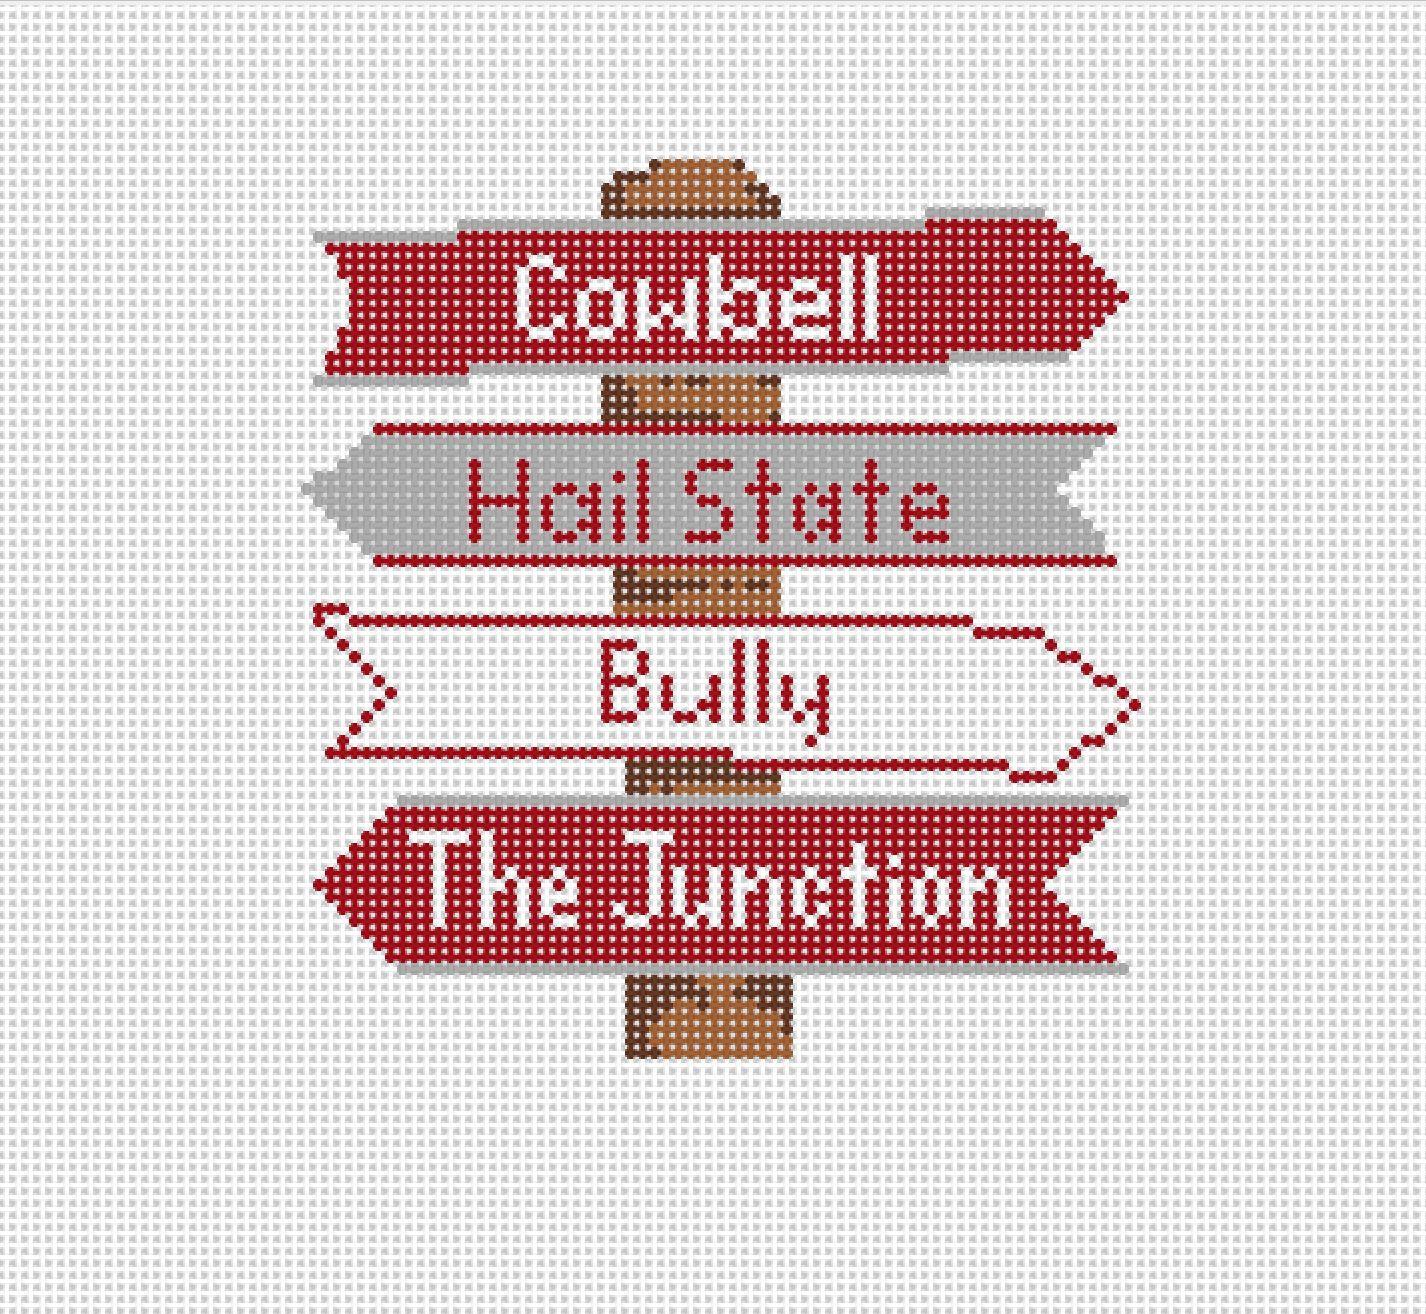 Mississippi State College Icon Destination Sign - Needlepoint by Laura